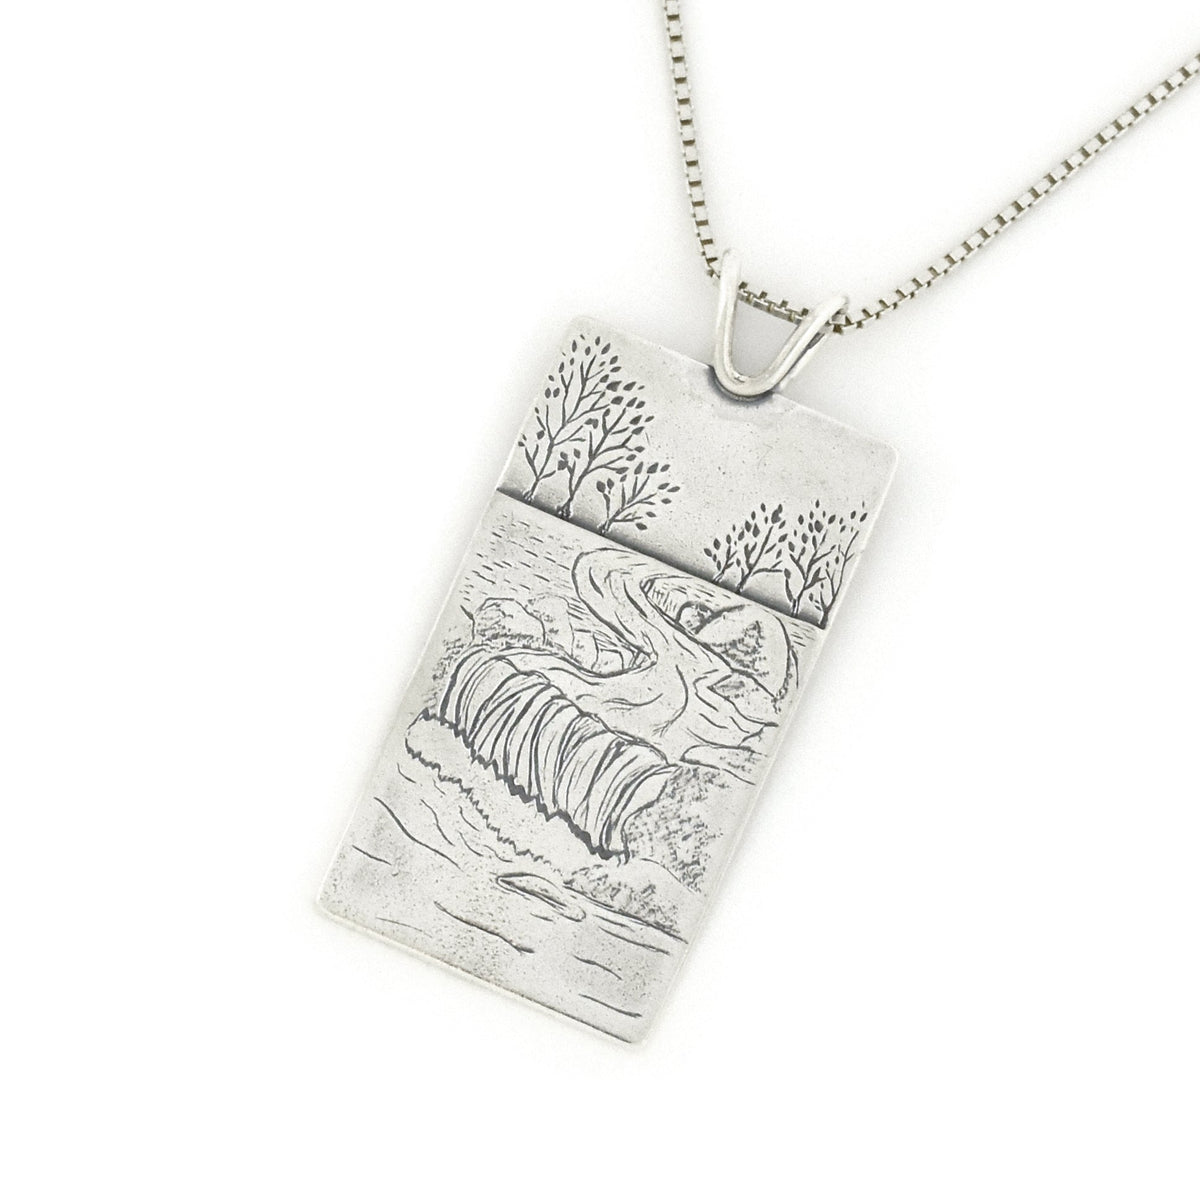 Yellow Dog Falls Pendant - Fundraiser for the Yellow Dog Watershed Preserve - Silver Pendant   6684 - handmade by Beth Millner Jewelry